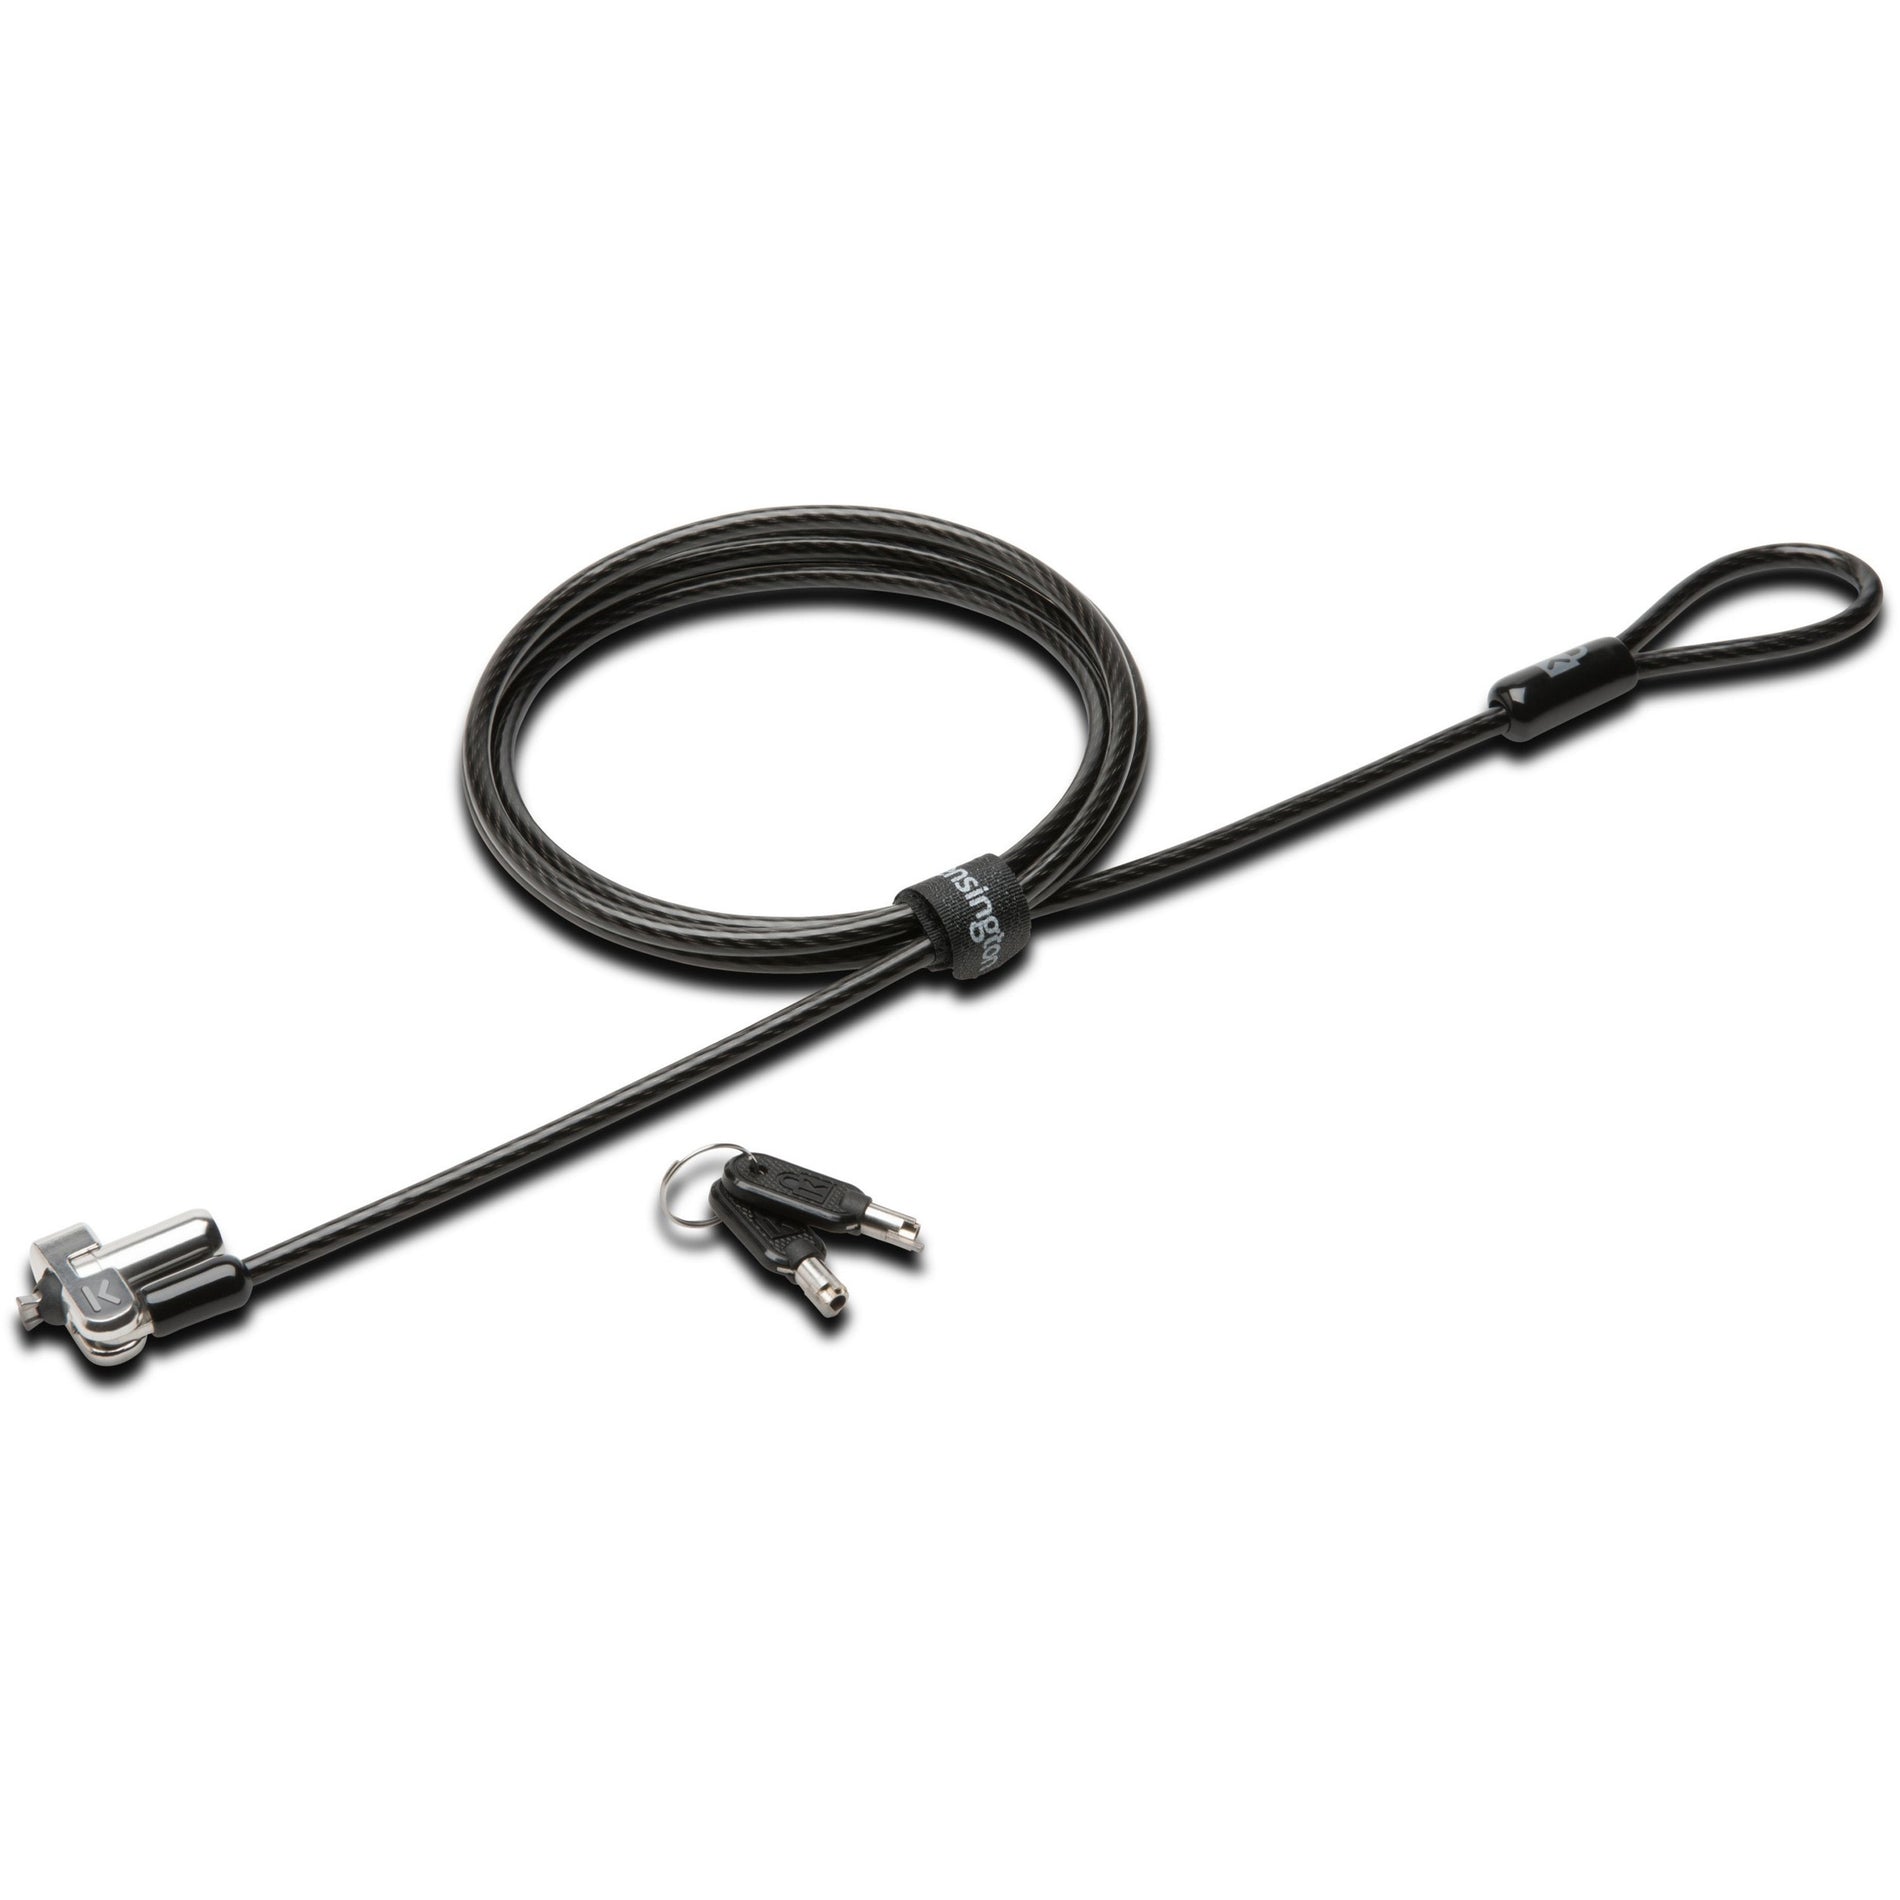 Kensington K64440WW N17 Keyed Laptop Lock for Dell Devices, 6 ft Cable Length, Keyed Lock